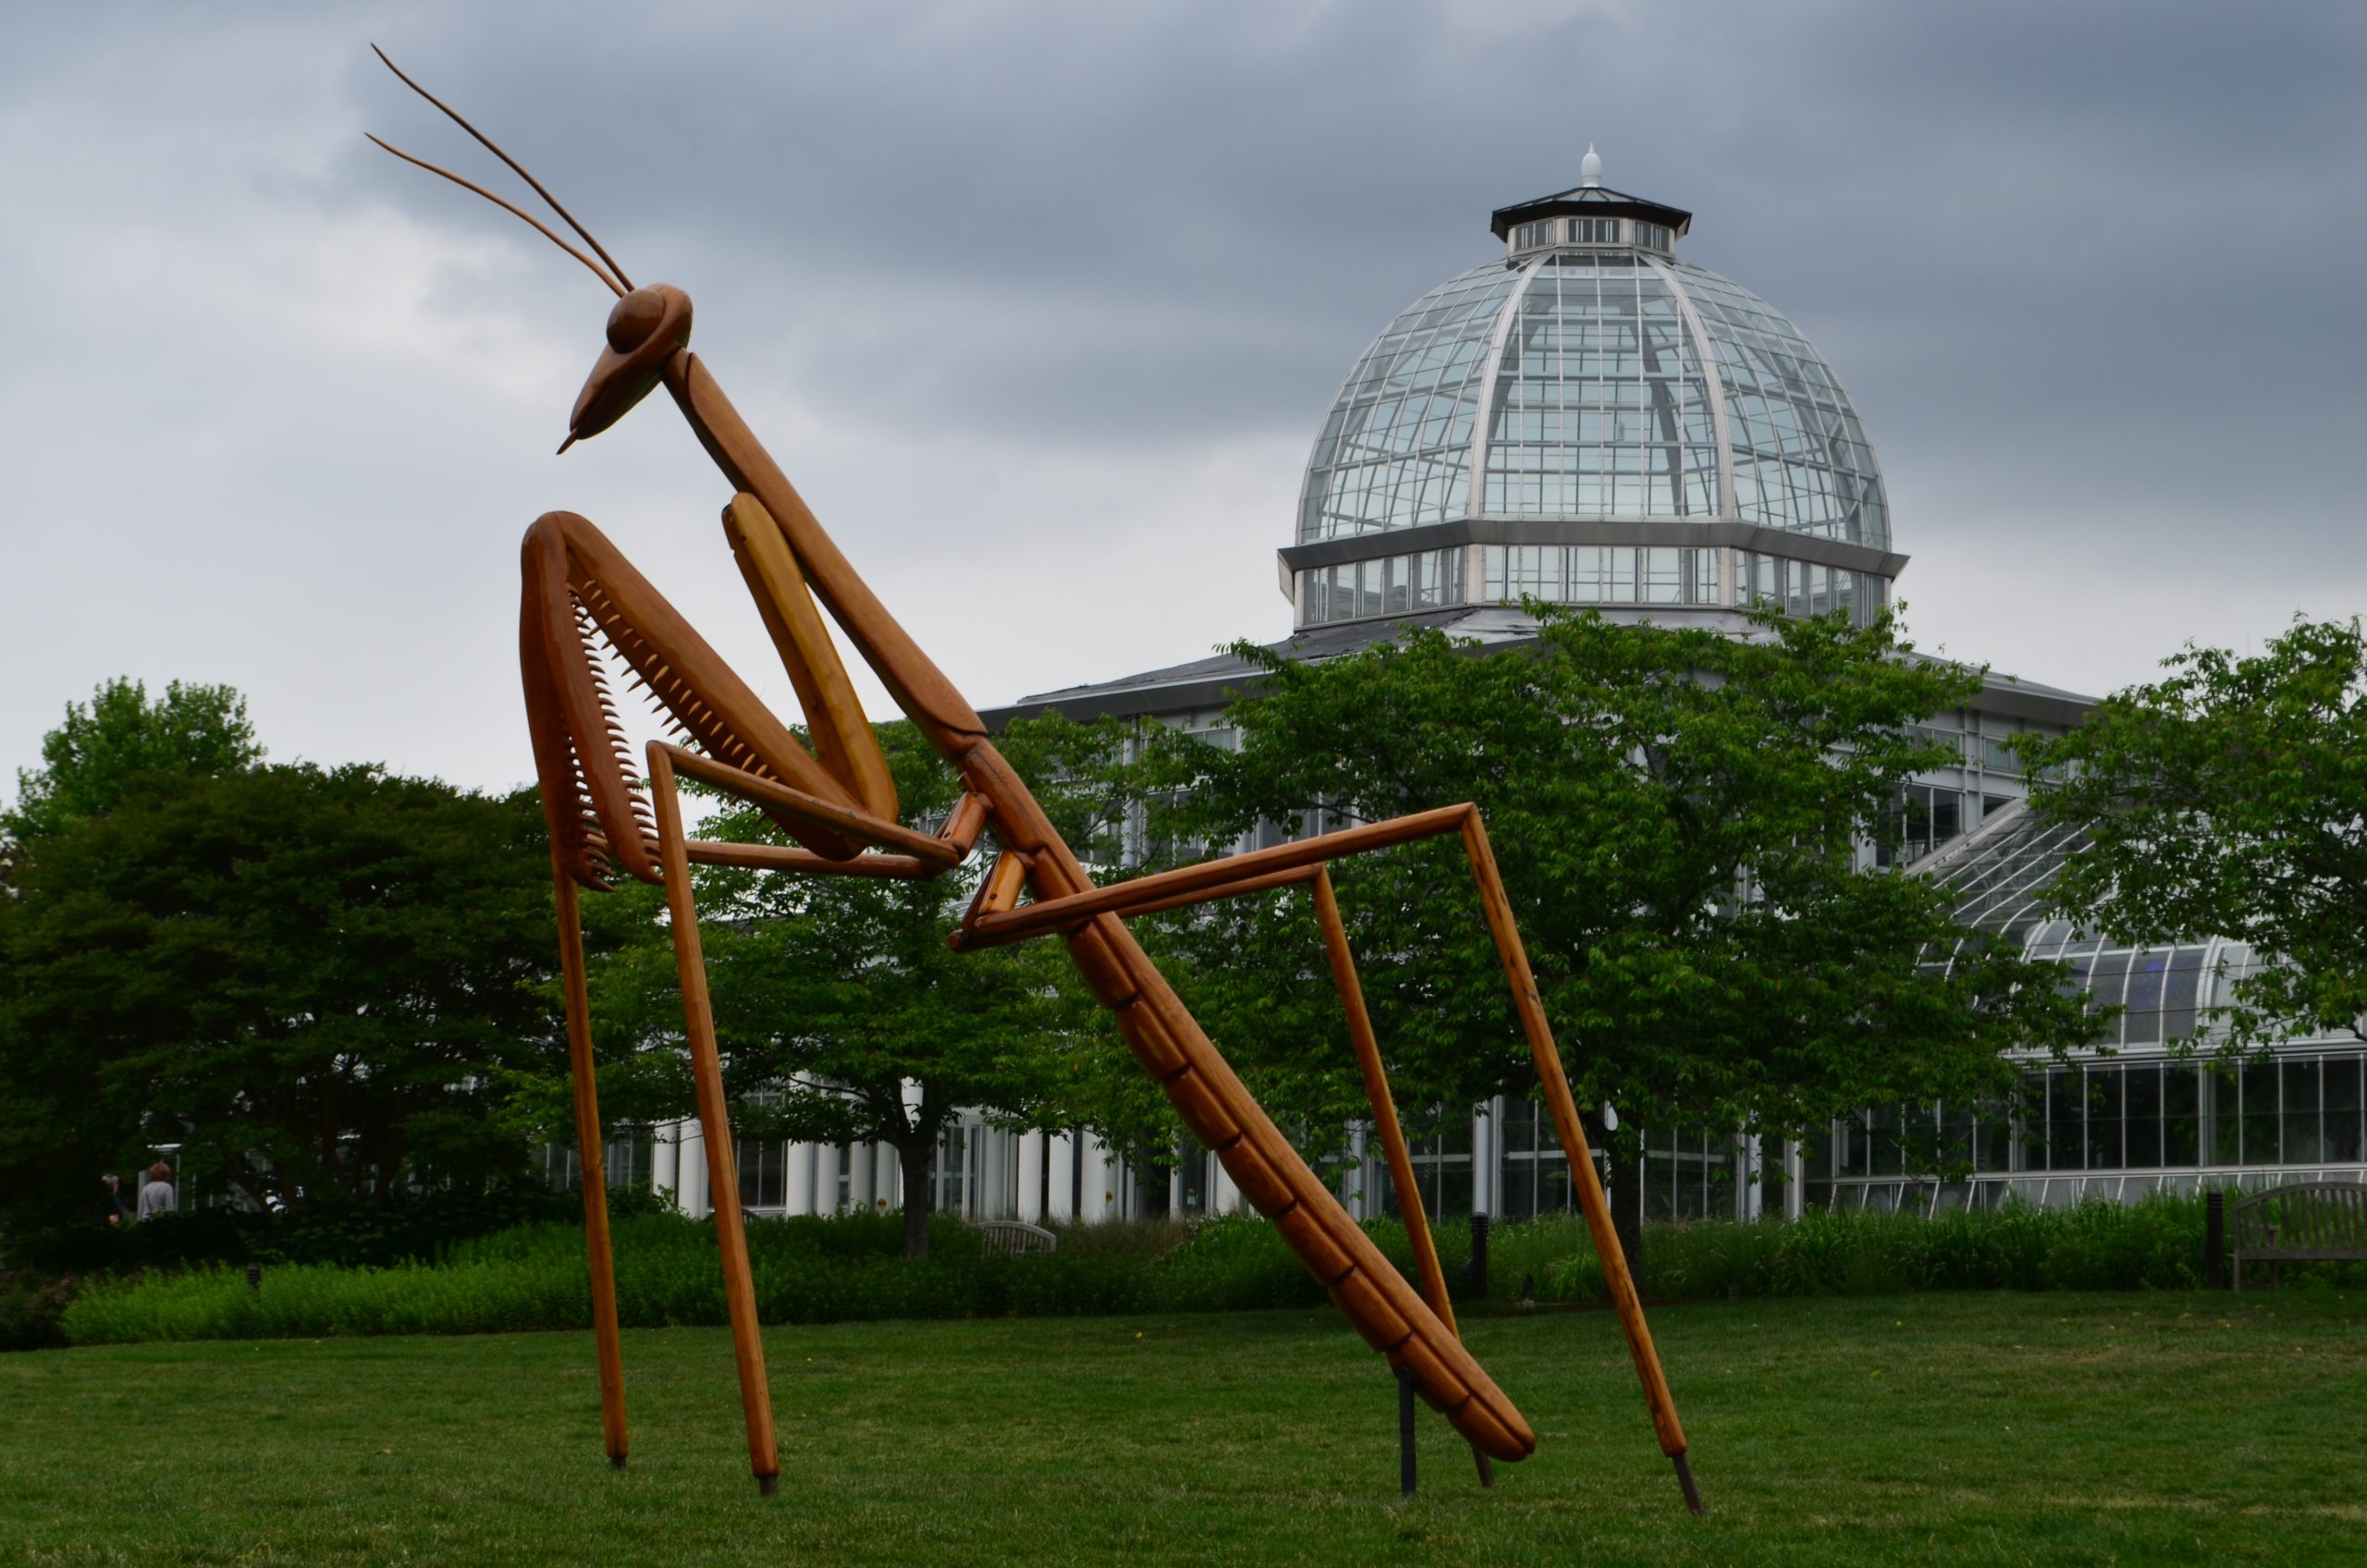 Big Bugs Mantis in front of the Conservatory. Image by Jonah Holland